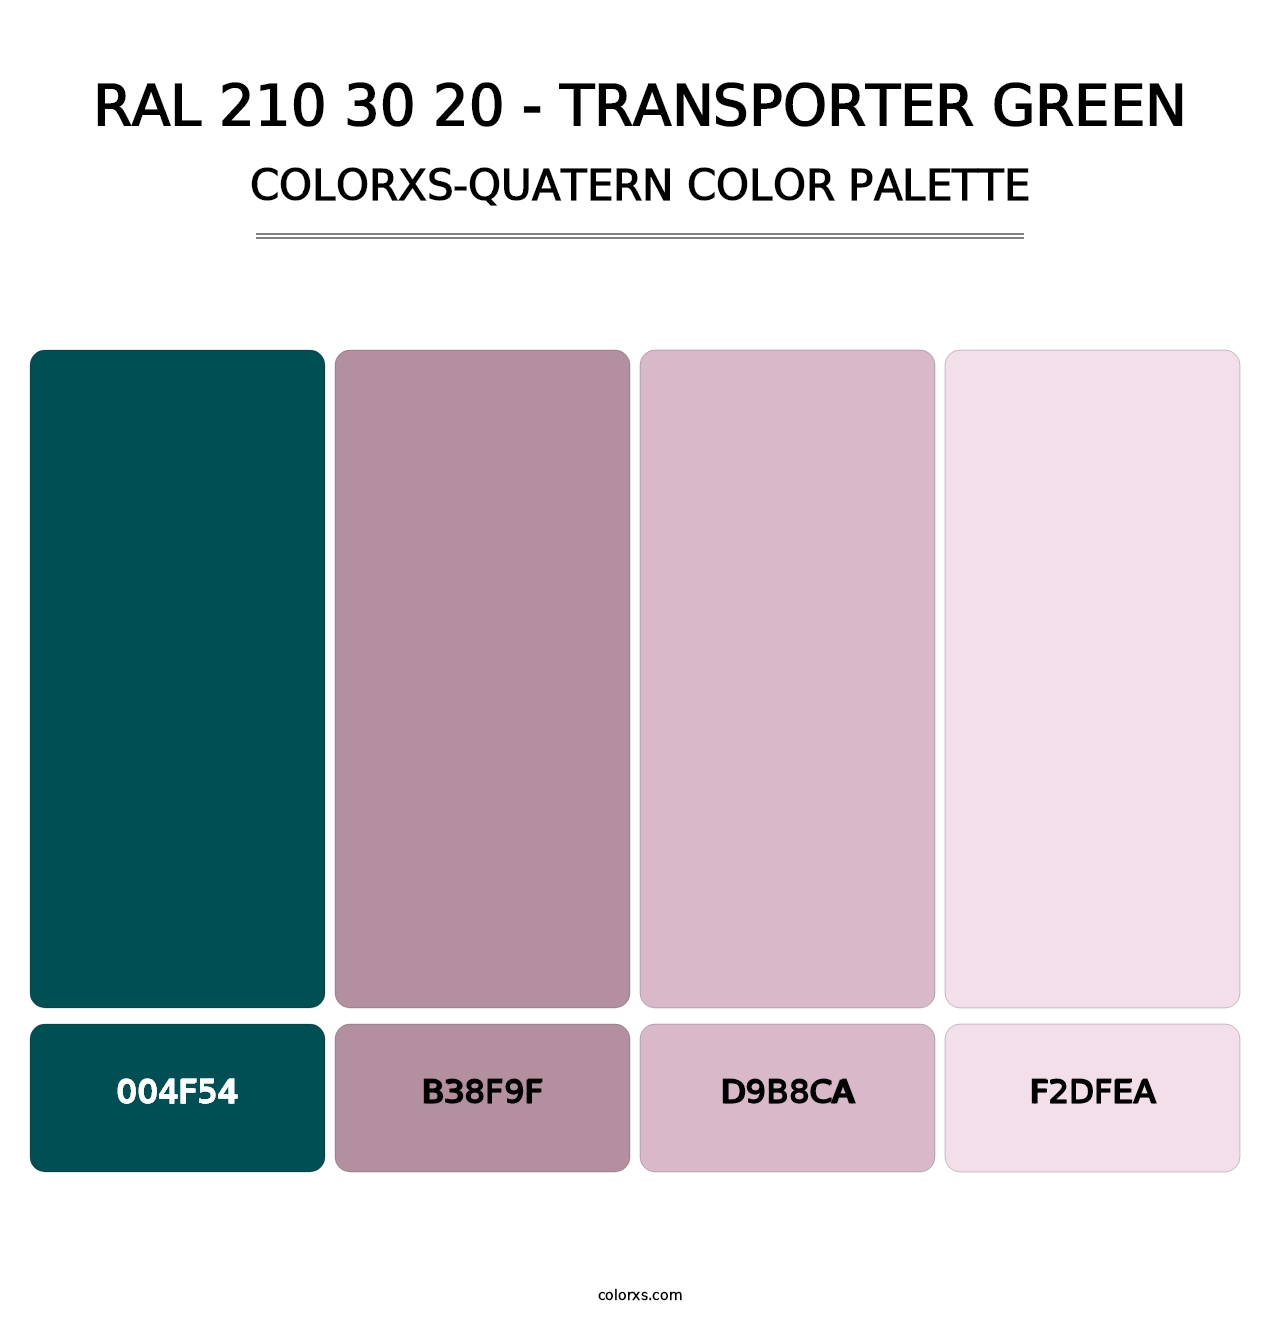 RAL 210 30 20 - Transporter Green - Colorxs Quatern Palette